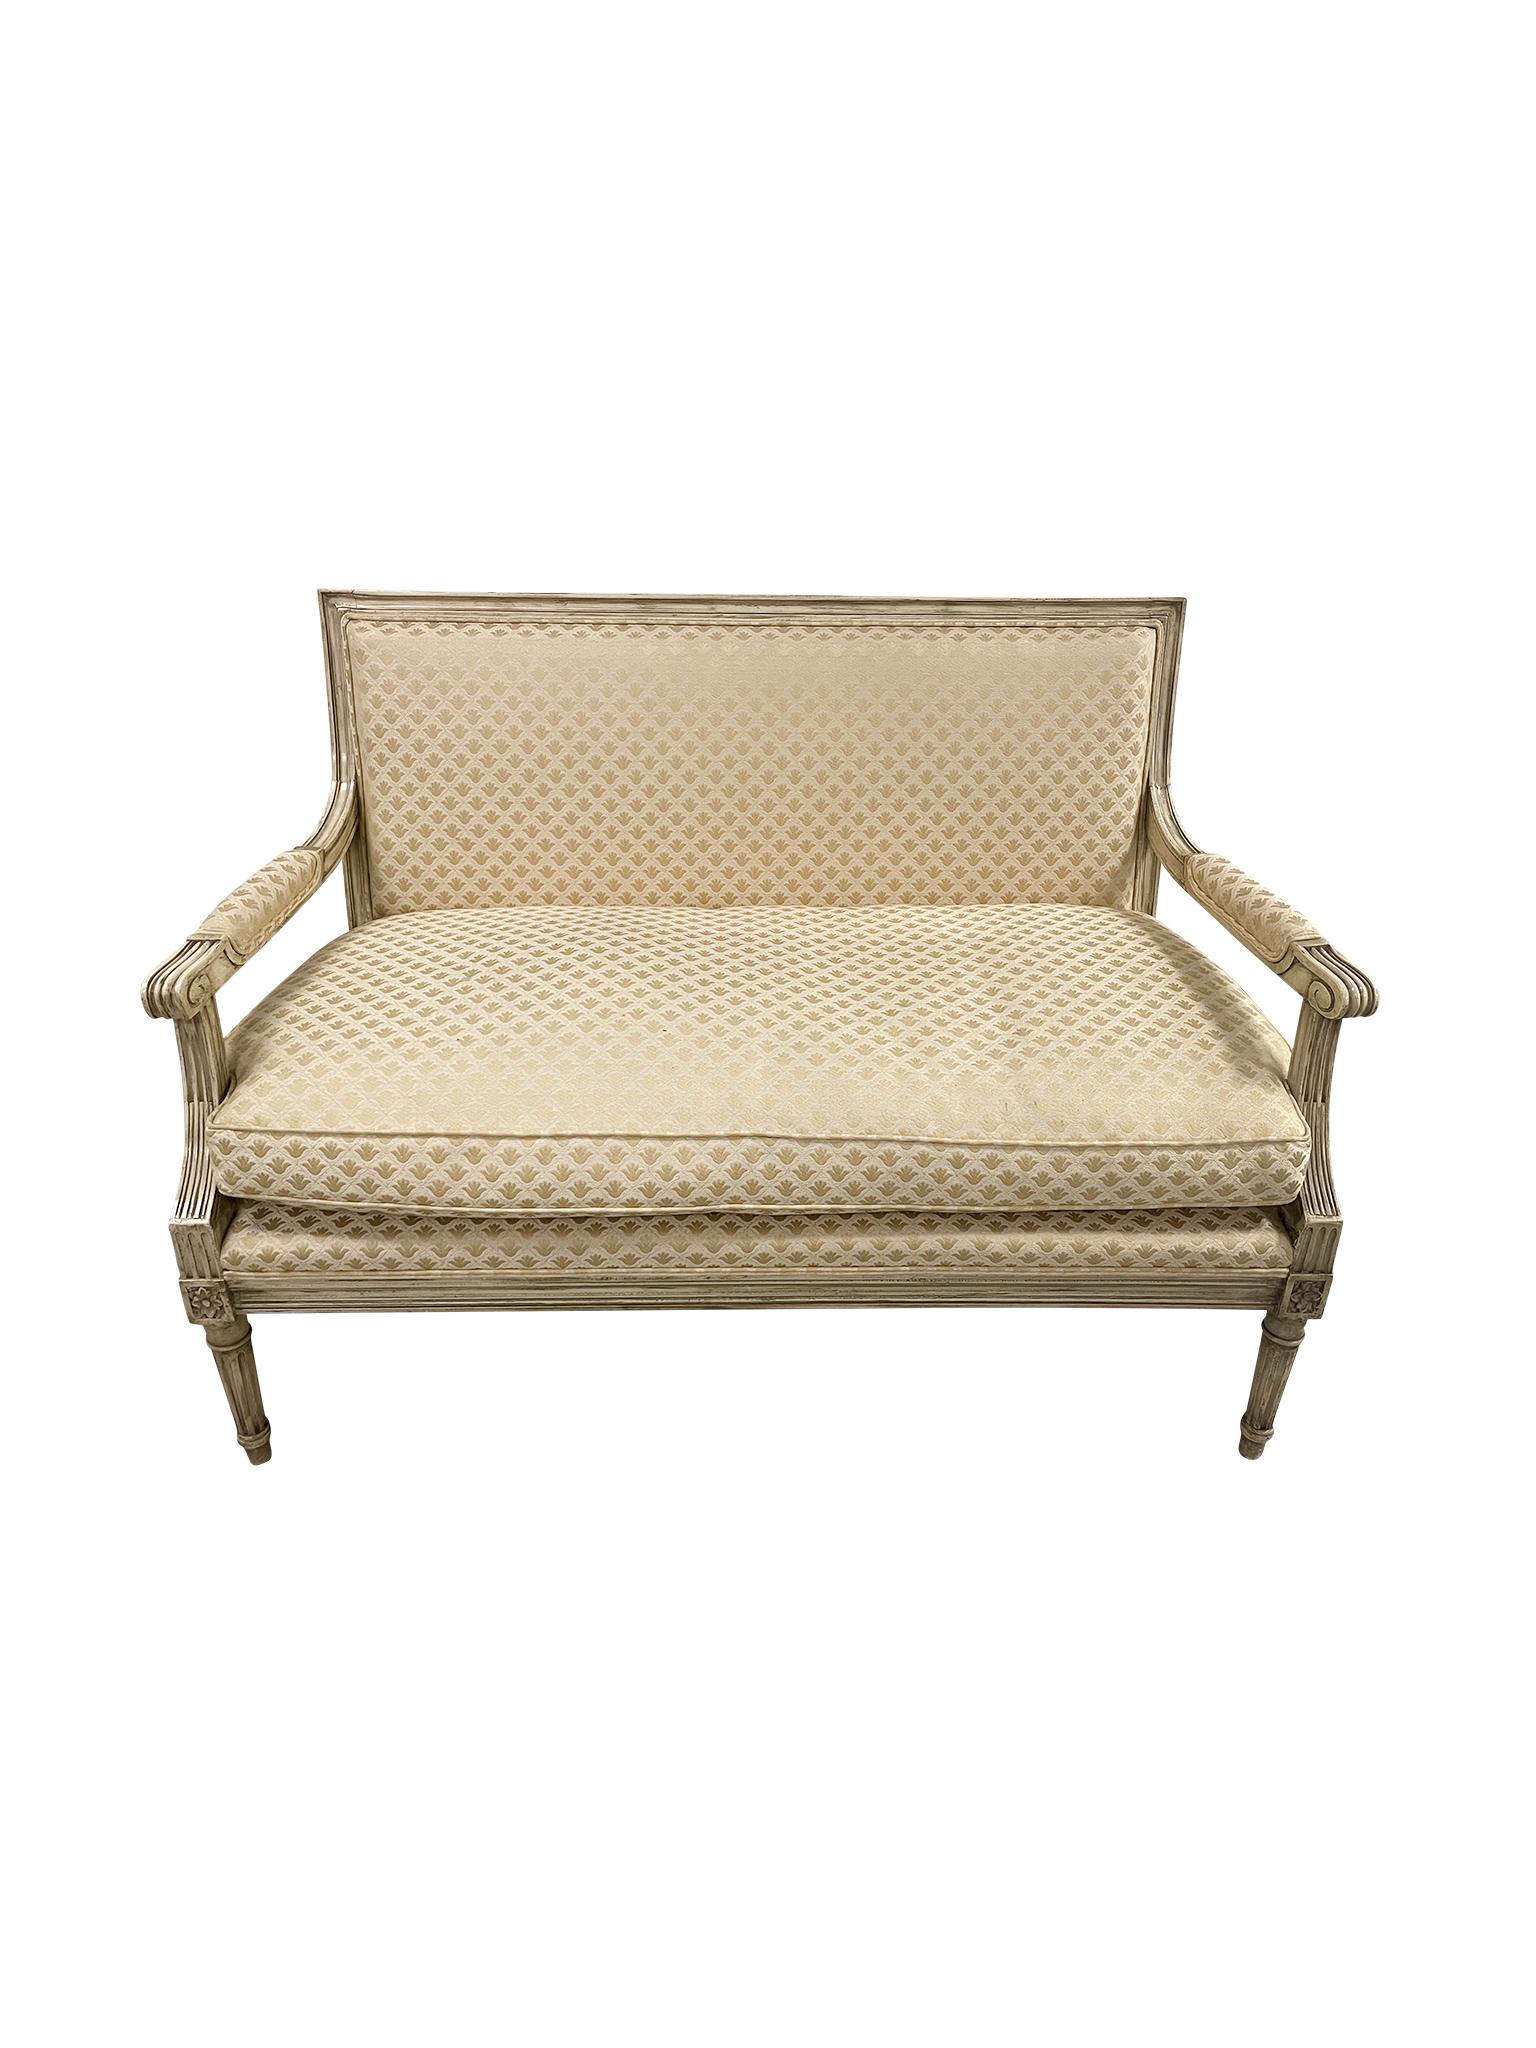 1920s, Louis XVI Style Settee In Good Condition For Sale In New York, NY